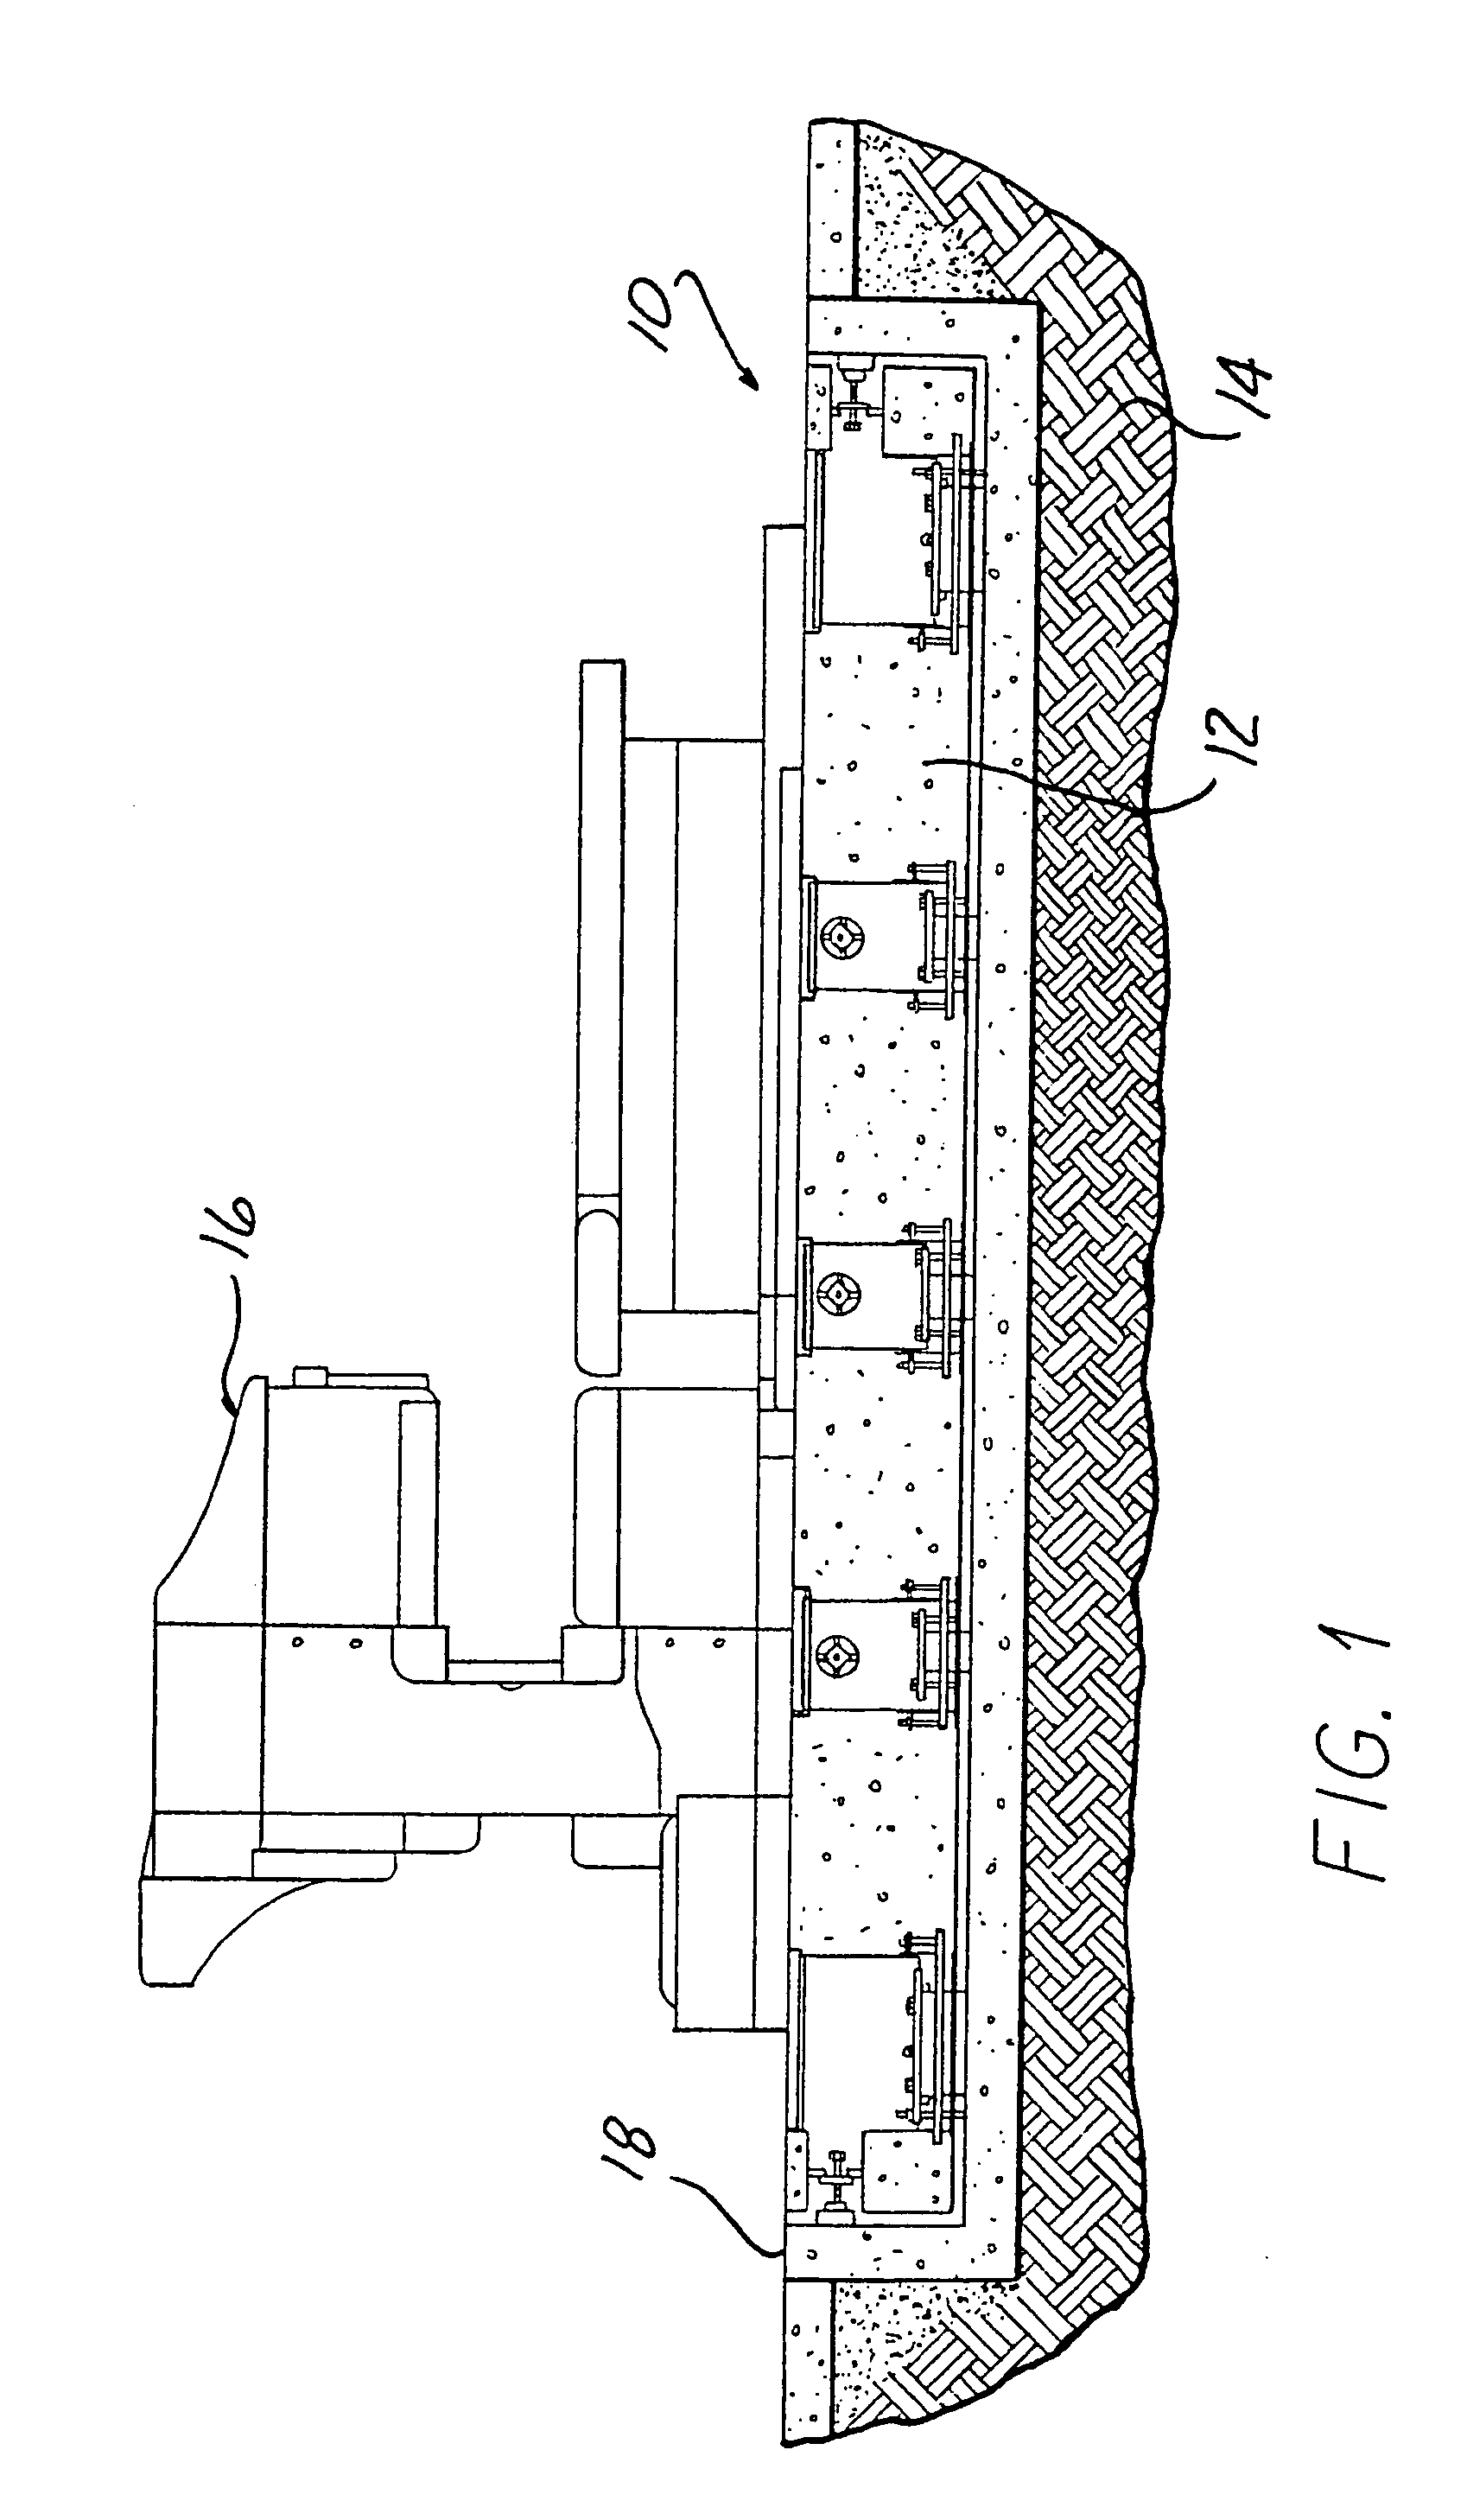 Apparatus for isolating and leveling a machine foundation